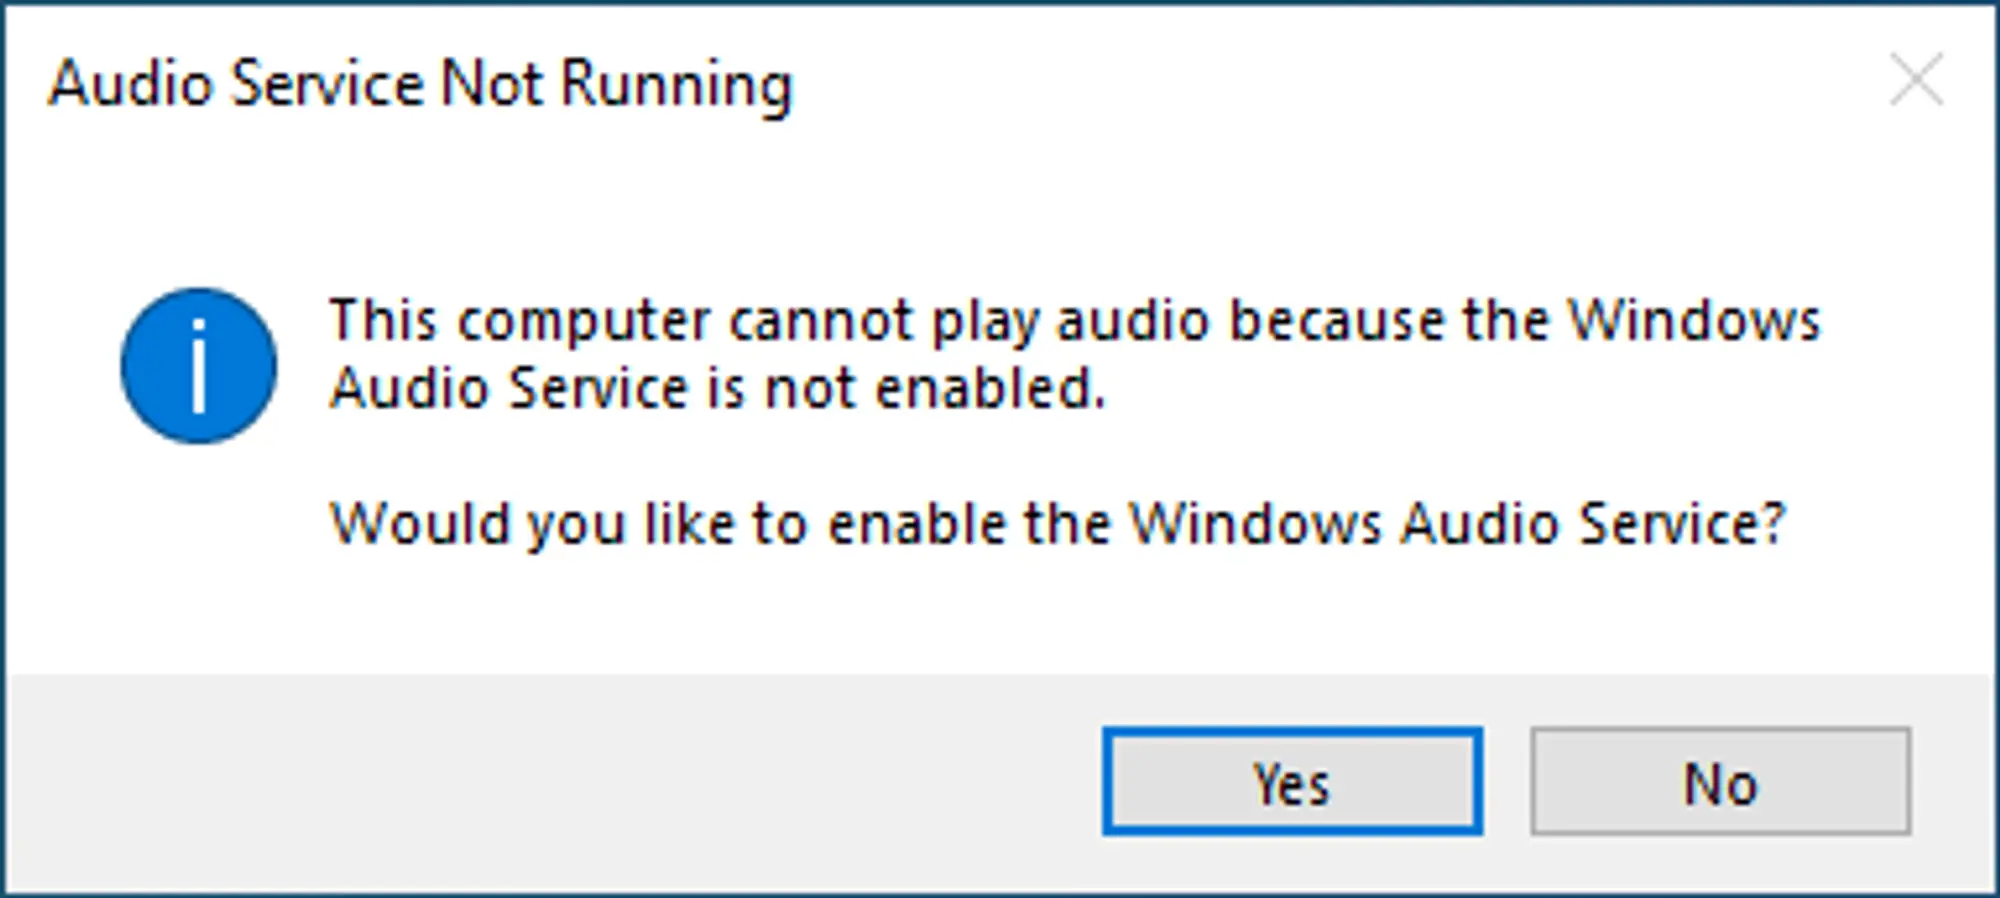 A Windows dialog box with the title “Audio Service Not Running” and a body explaining the the Audio Service isn’t running, with a yes or no option for enabling it